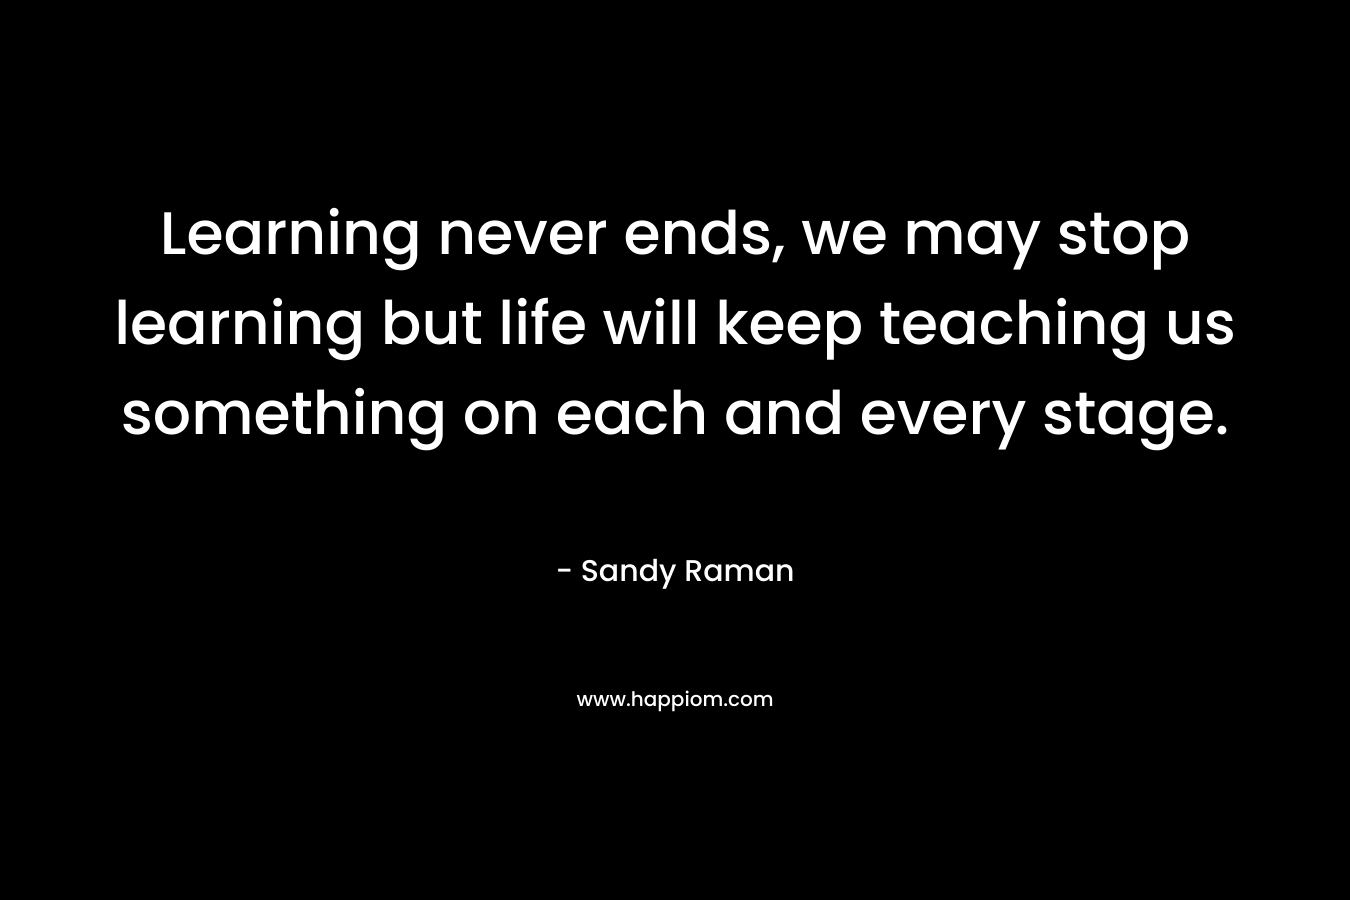 Learning never ends, we may stop learning but life will keep teaching us something on each and every stage.